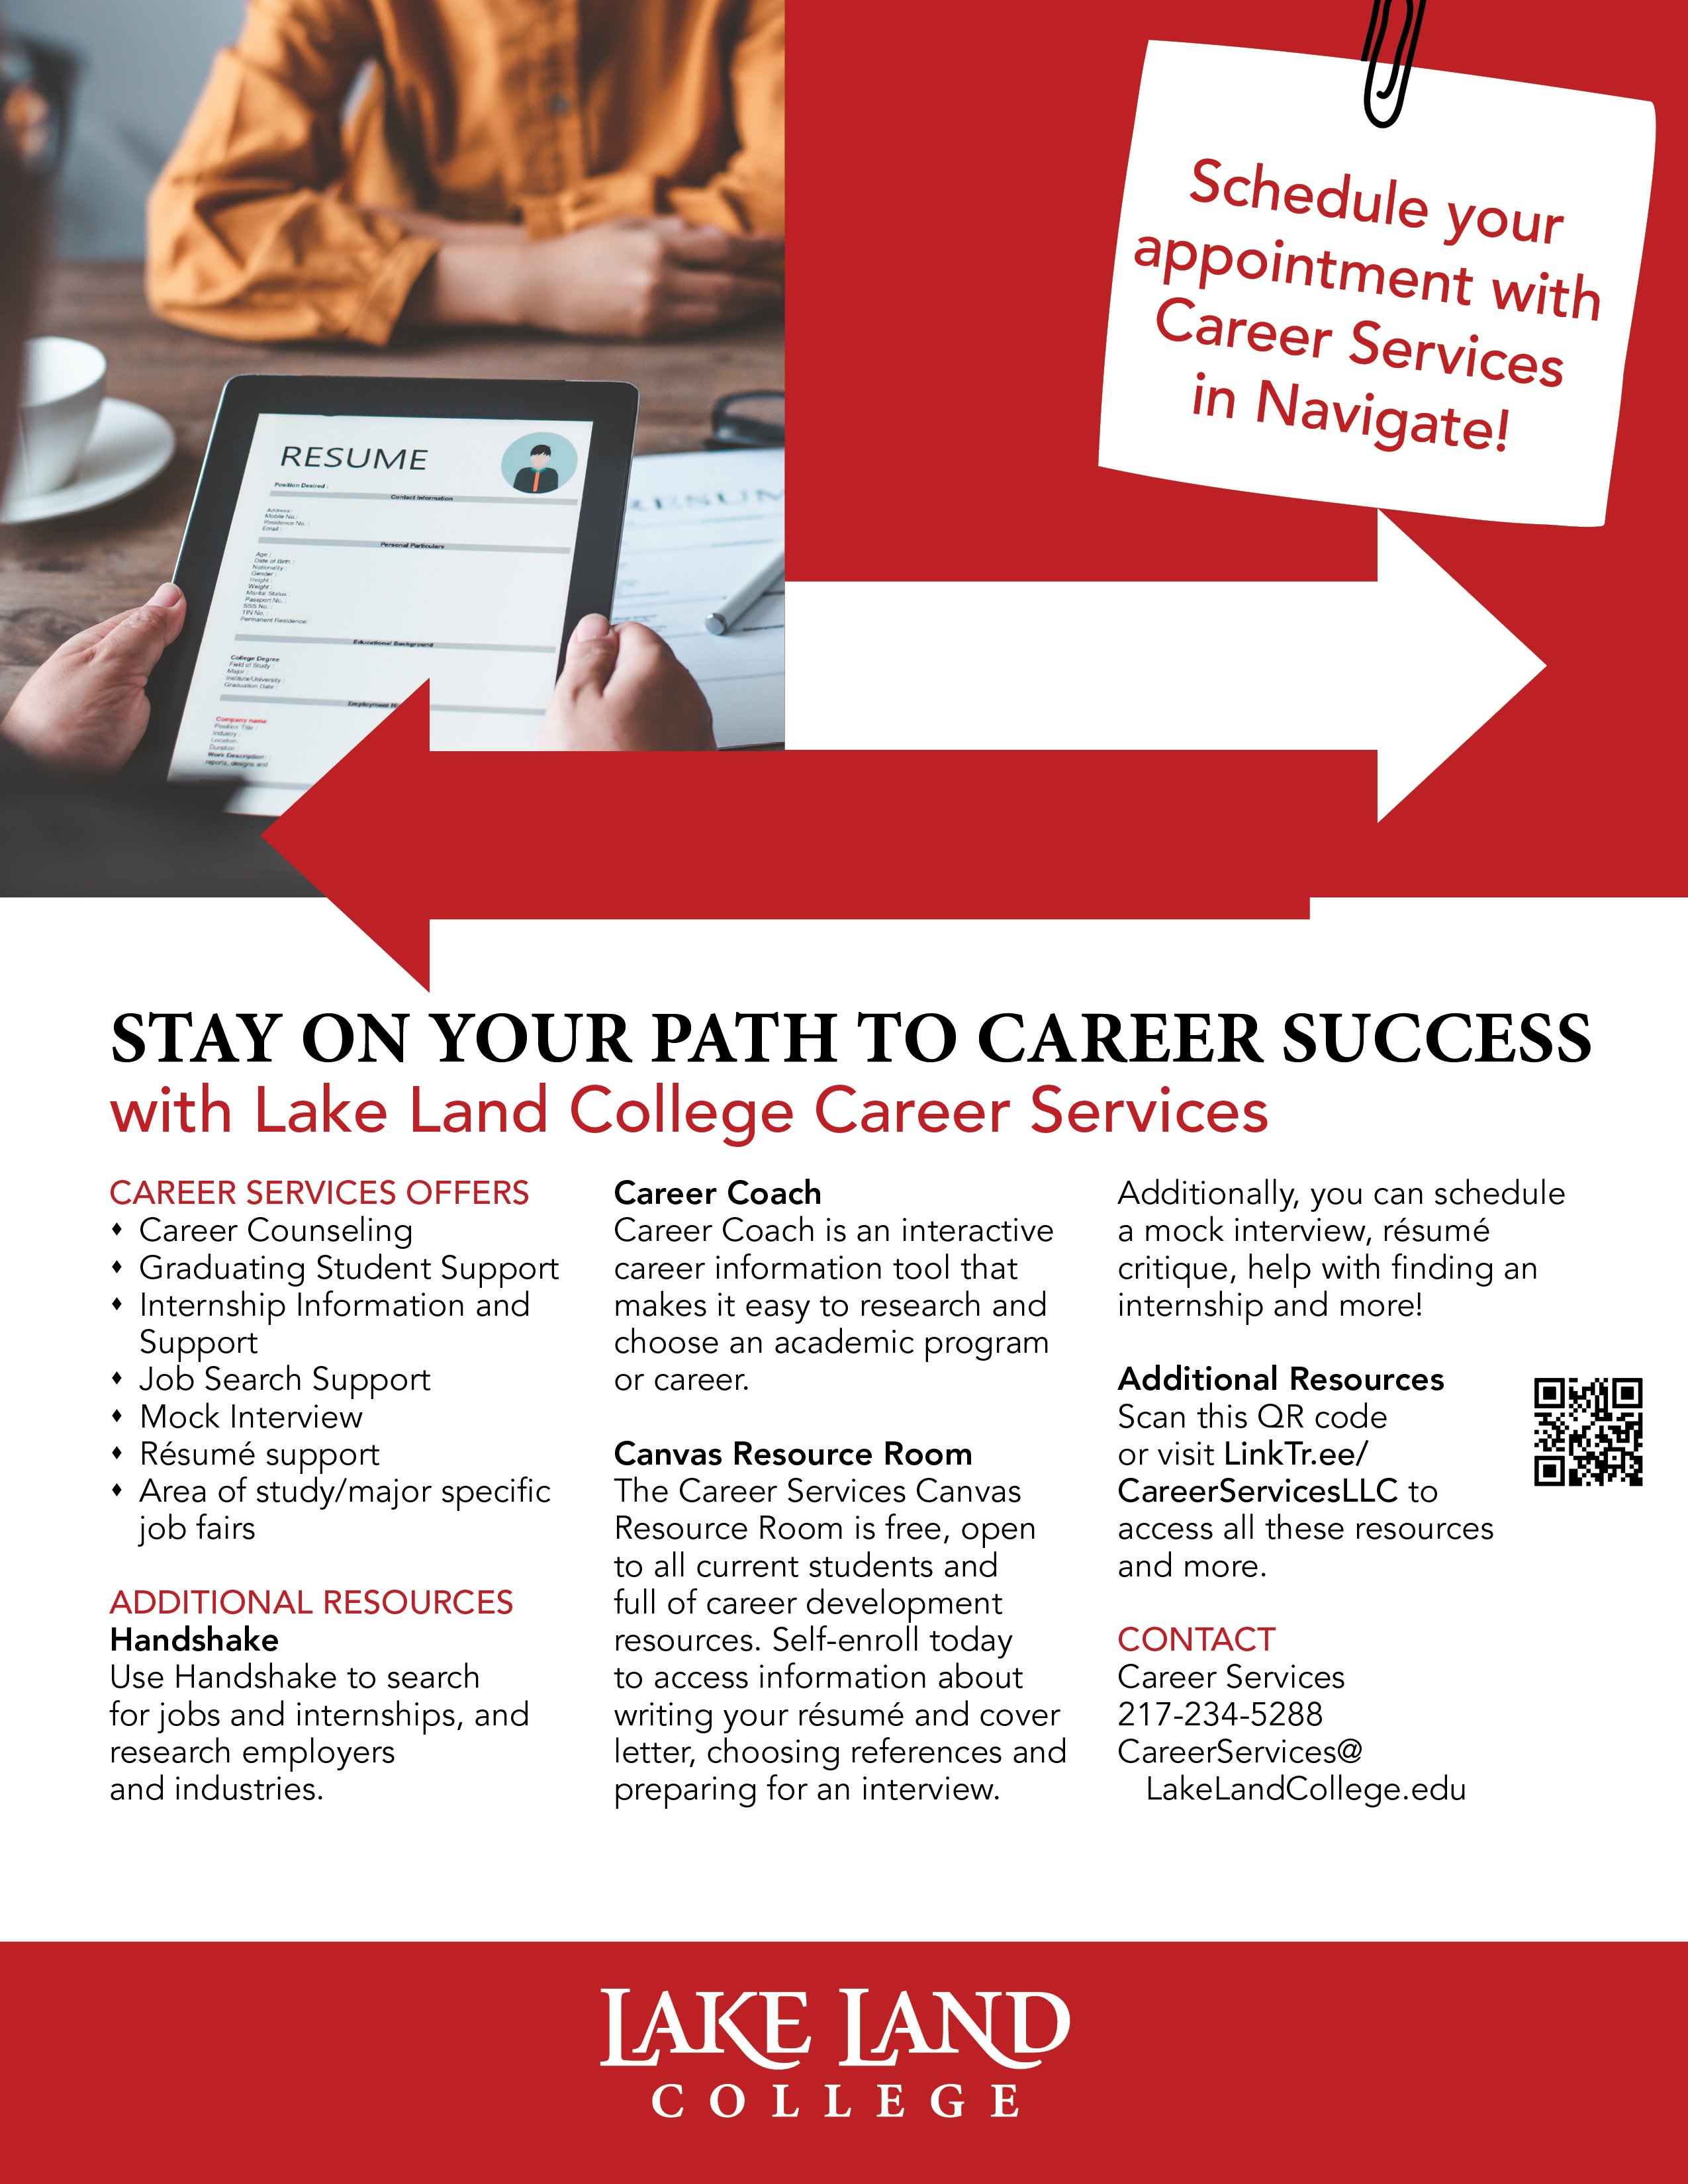 Student flyer for career services at Lake Land